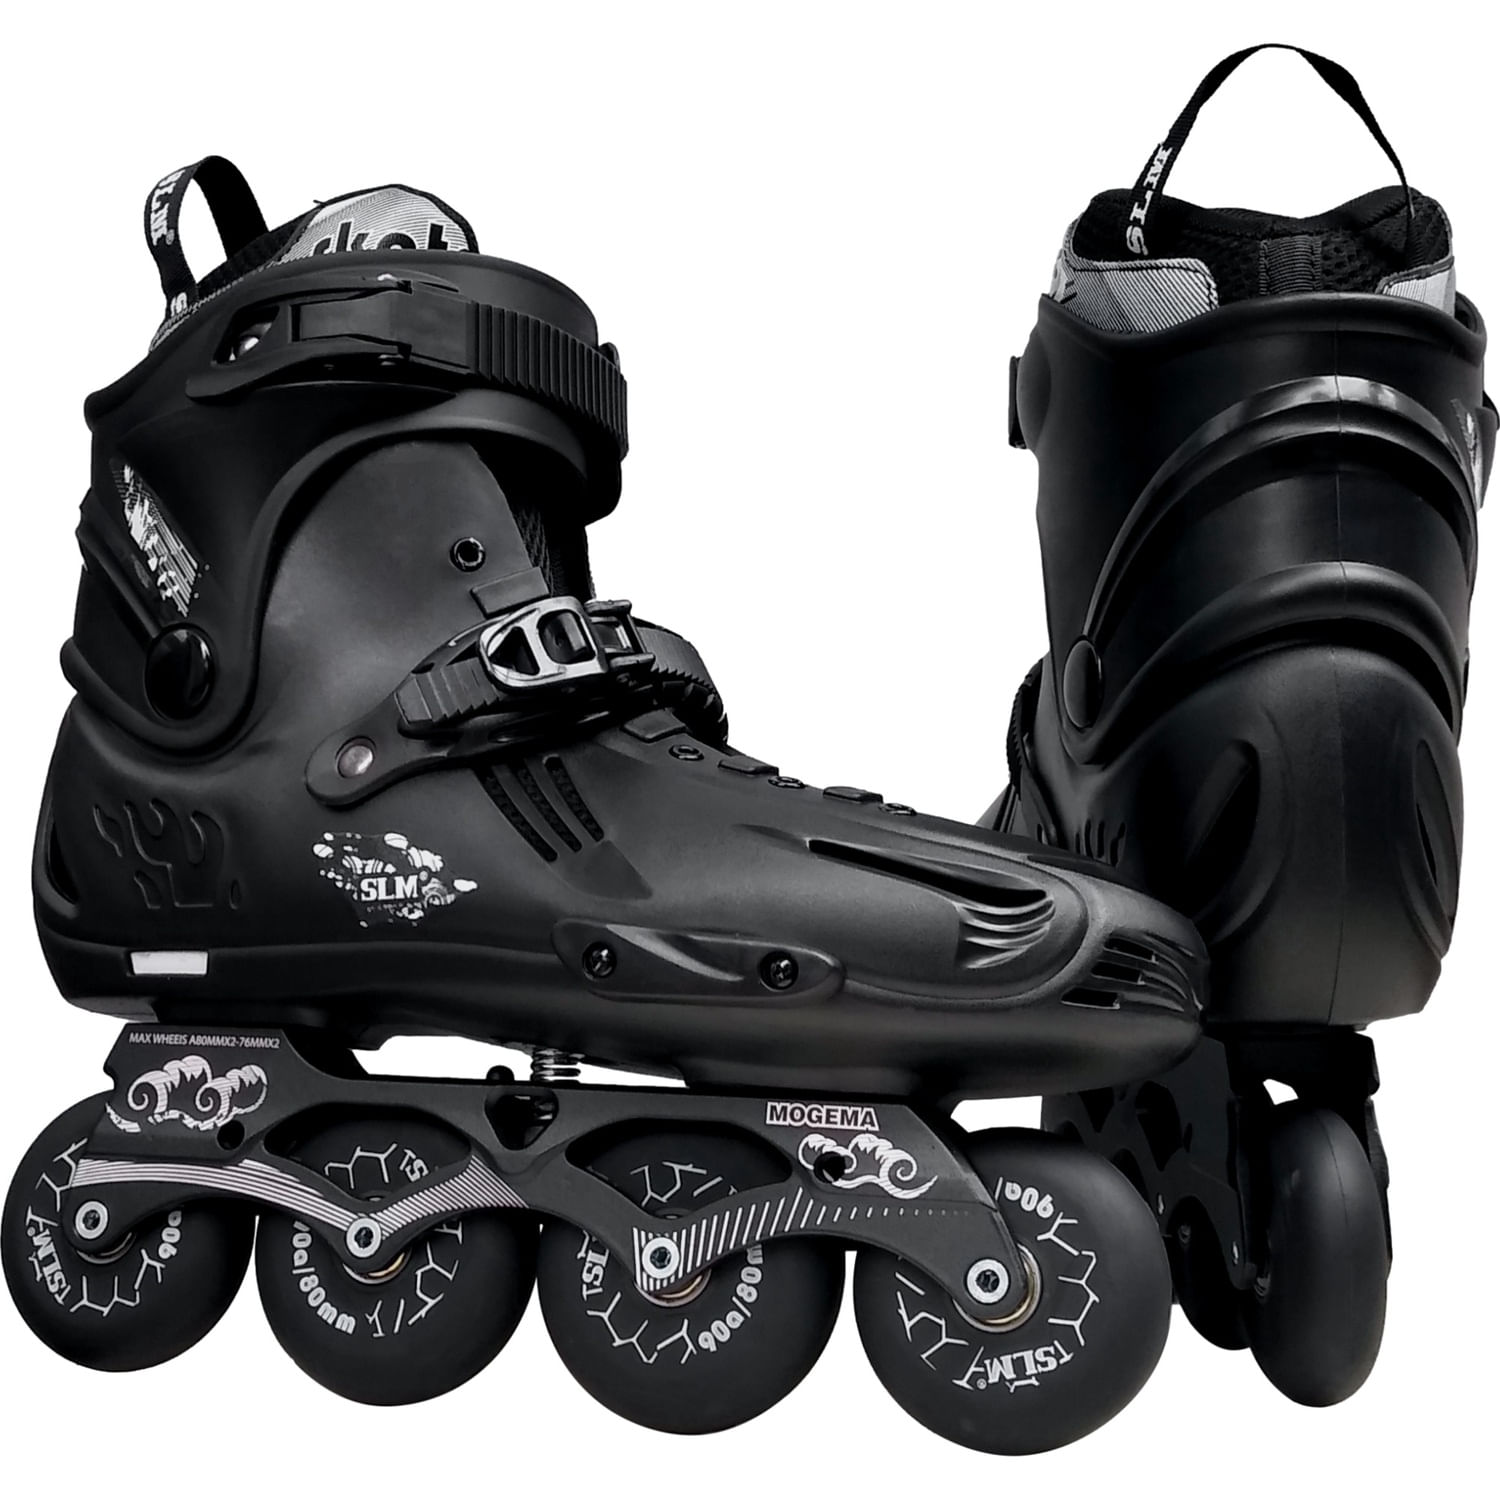 Patines Lineales T/40 SLM Freestyle Profesionales